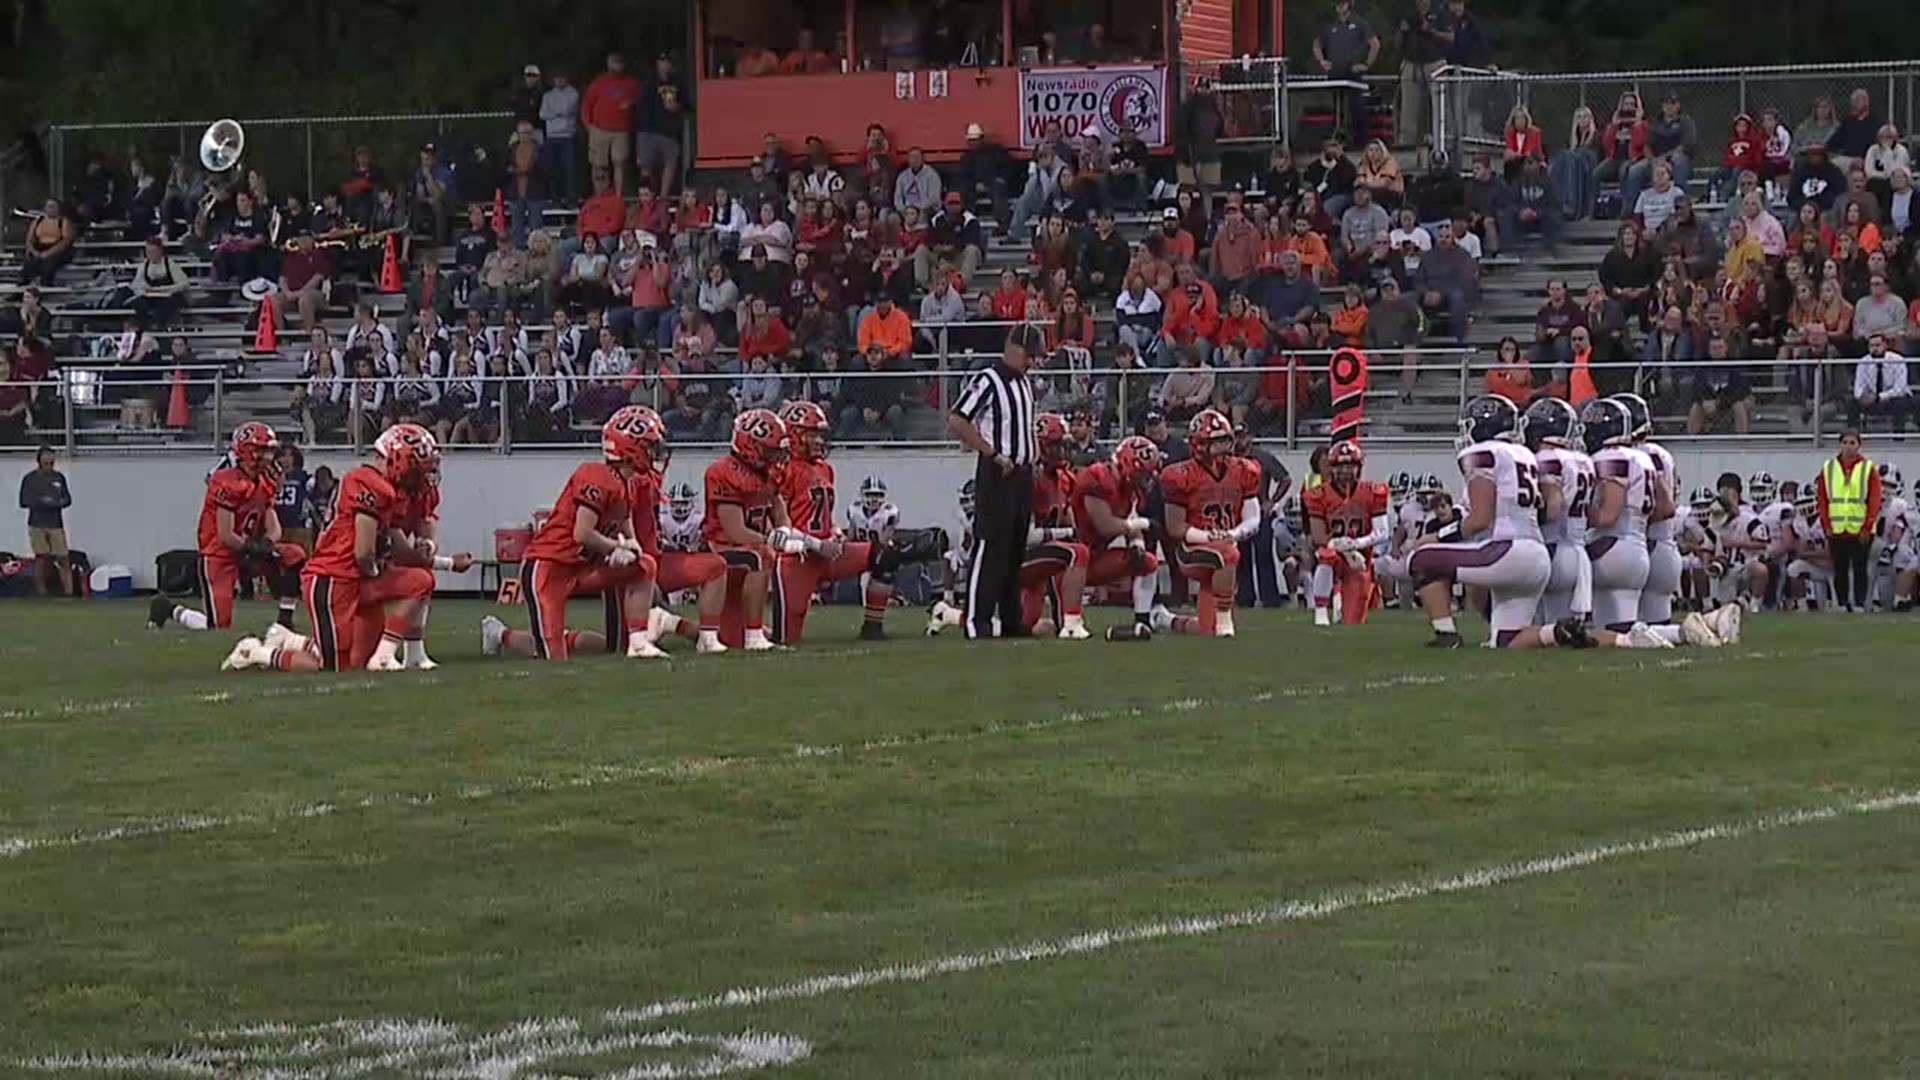 Newswatch 16’s Melissa Steininger explains how the Monday night game went well beyond the Friday night lights.